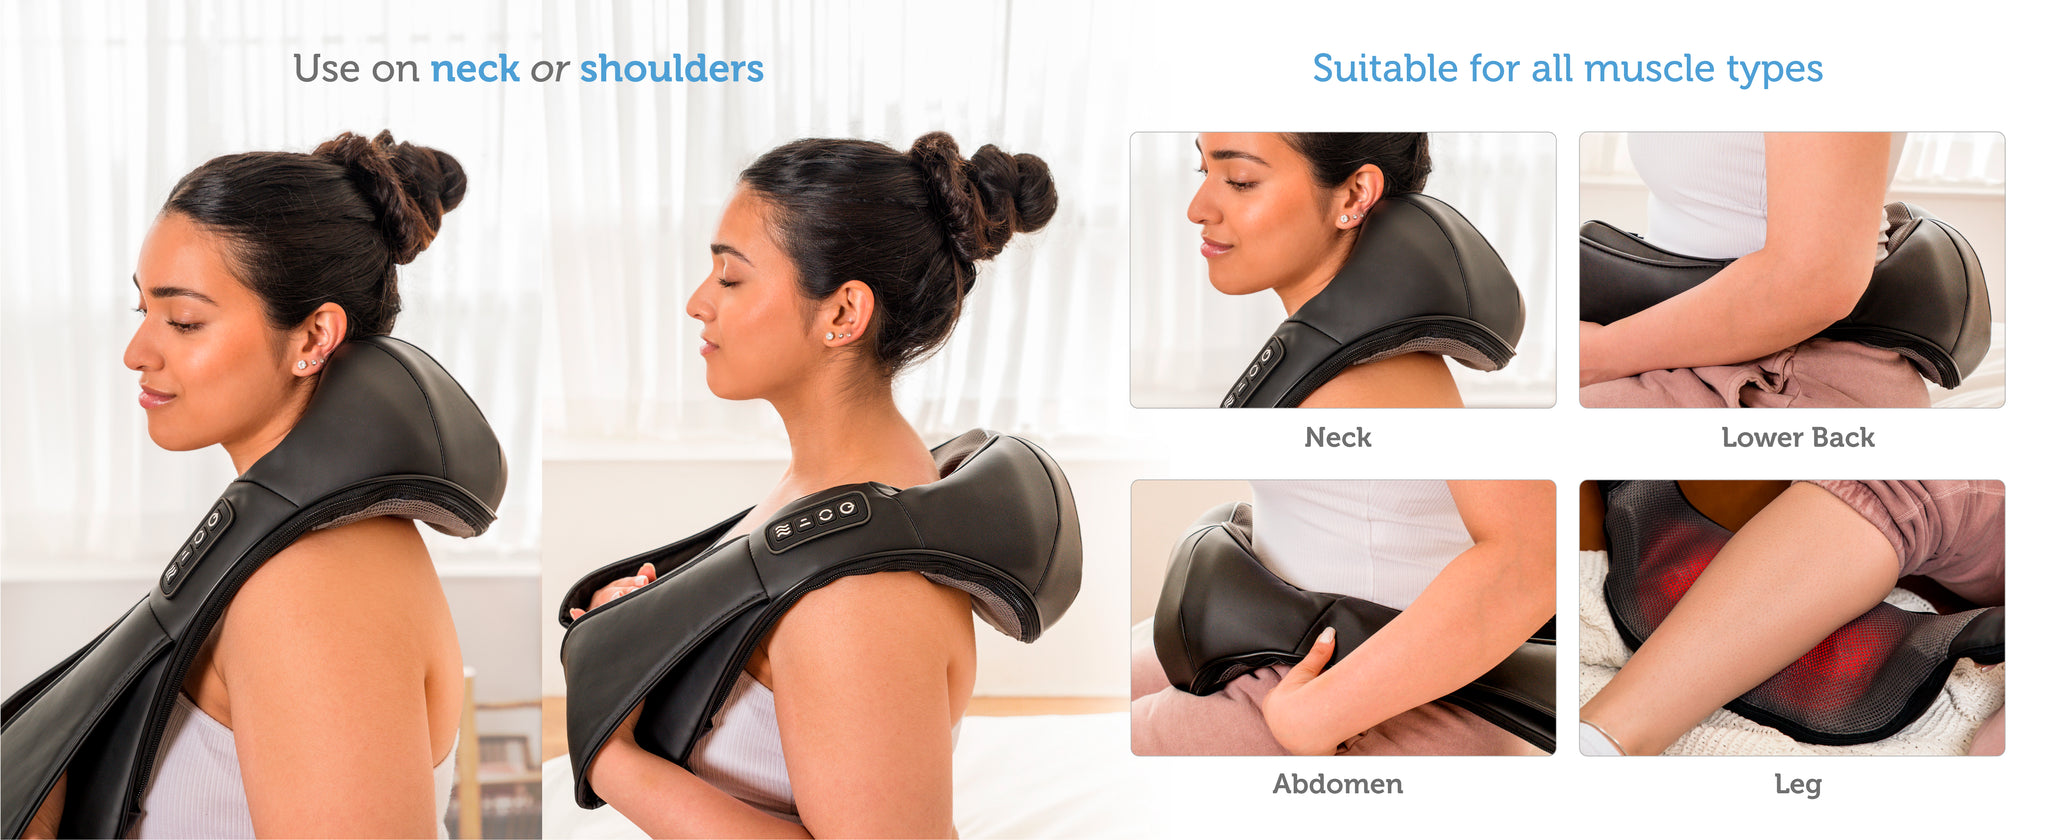 Used COMFIER CF-6302 Shiatsu Neck and Shoulder Back Massager,Massage Pillow  with Heat,Best Gift for Men/Women/Mom/Dad. For Sale - DOTmed Listing  #4669193